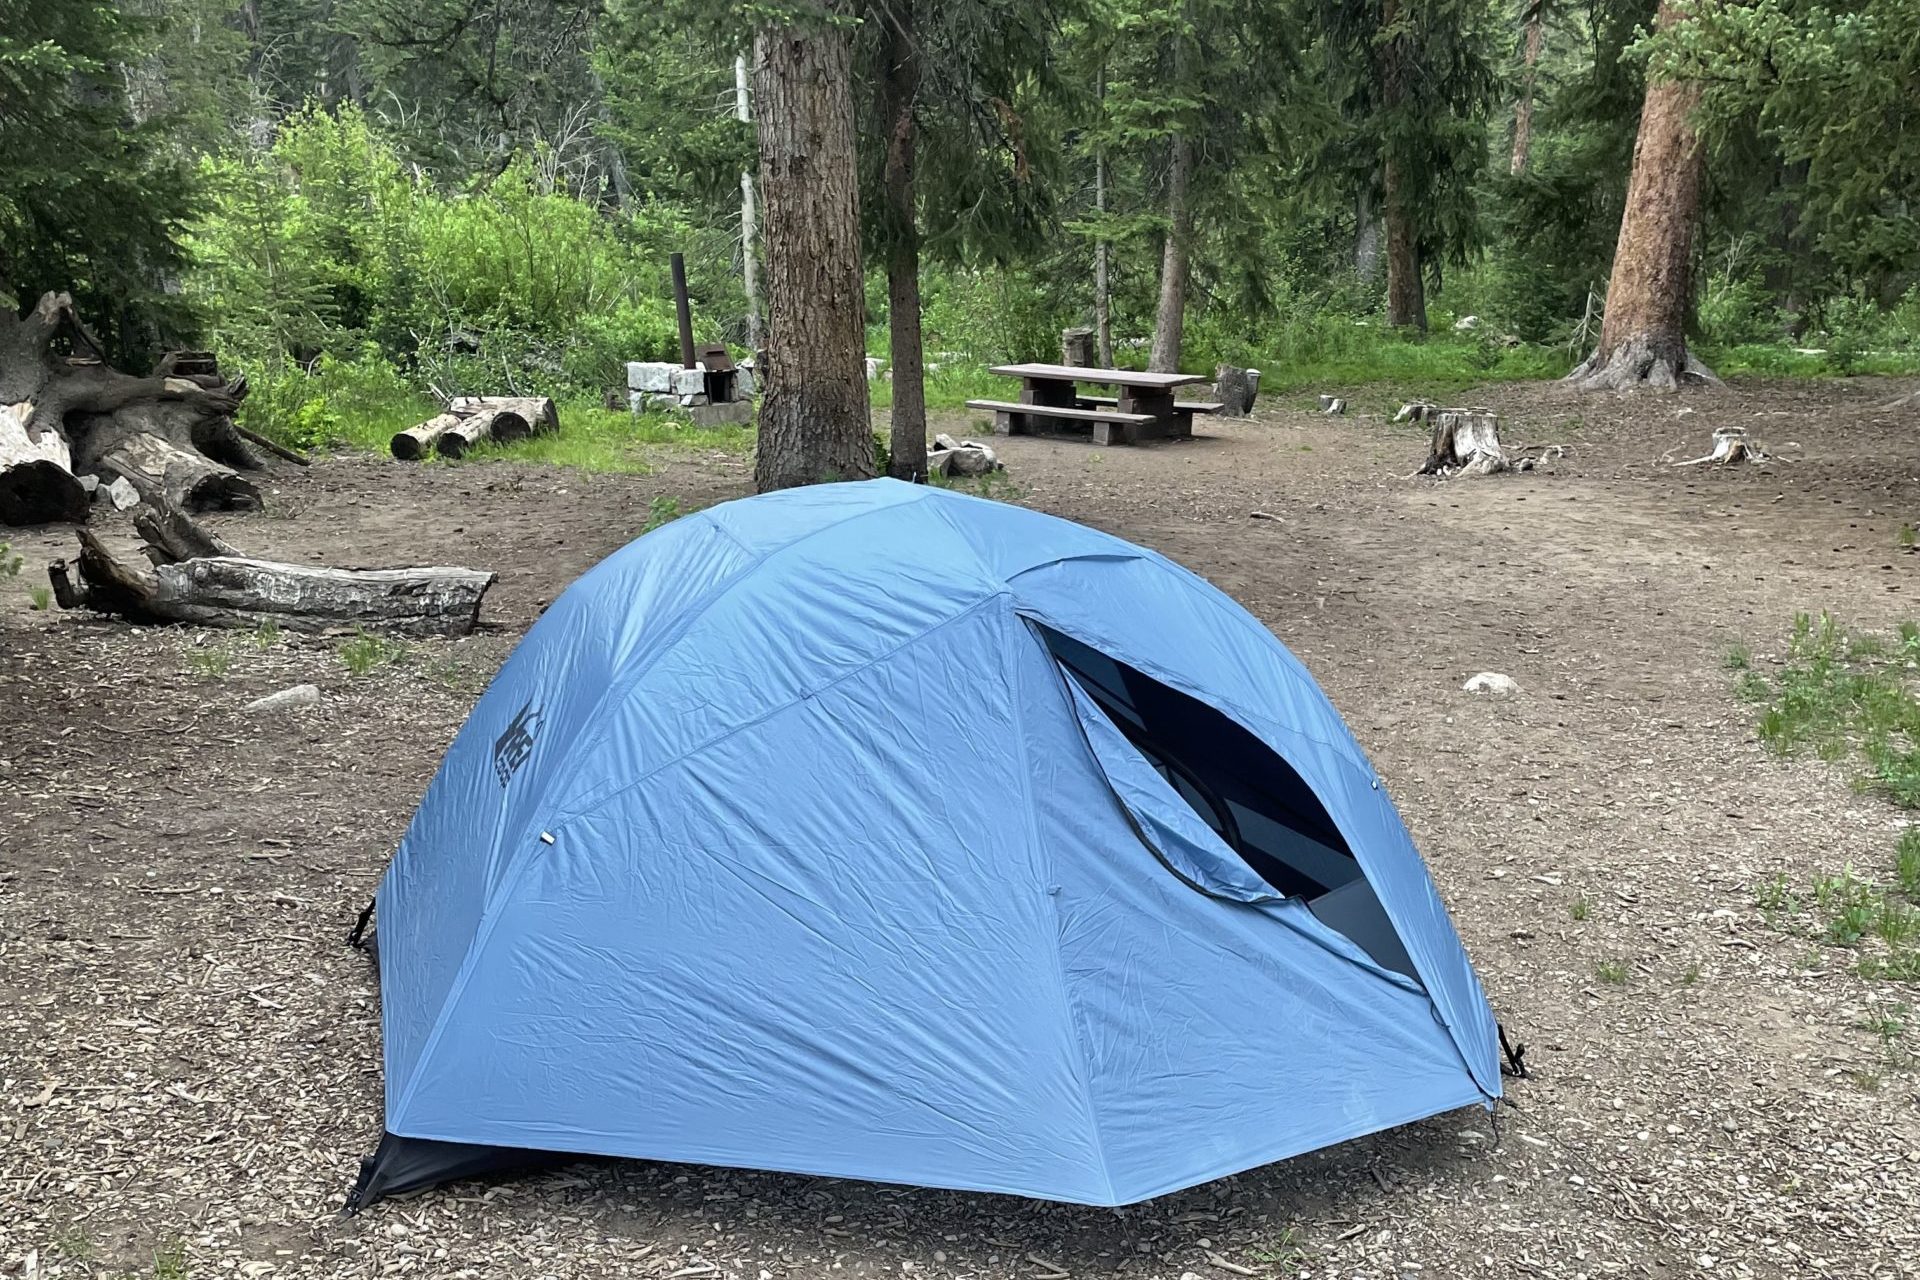 Utah campgrounds are packed - TownLift, Park City News